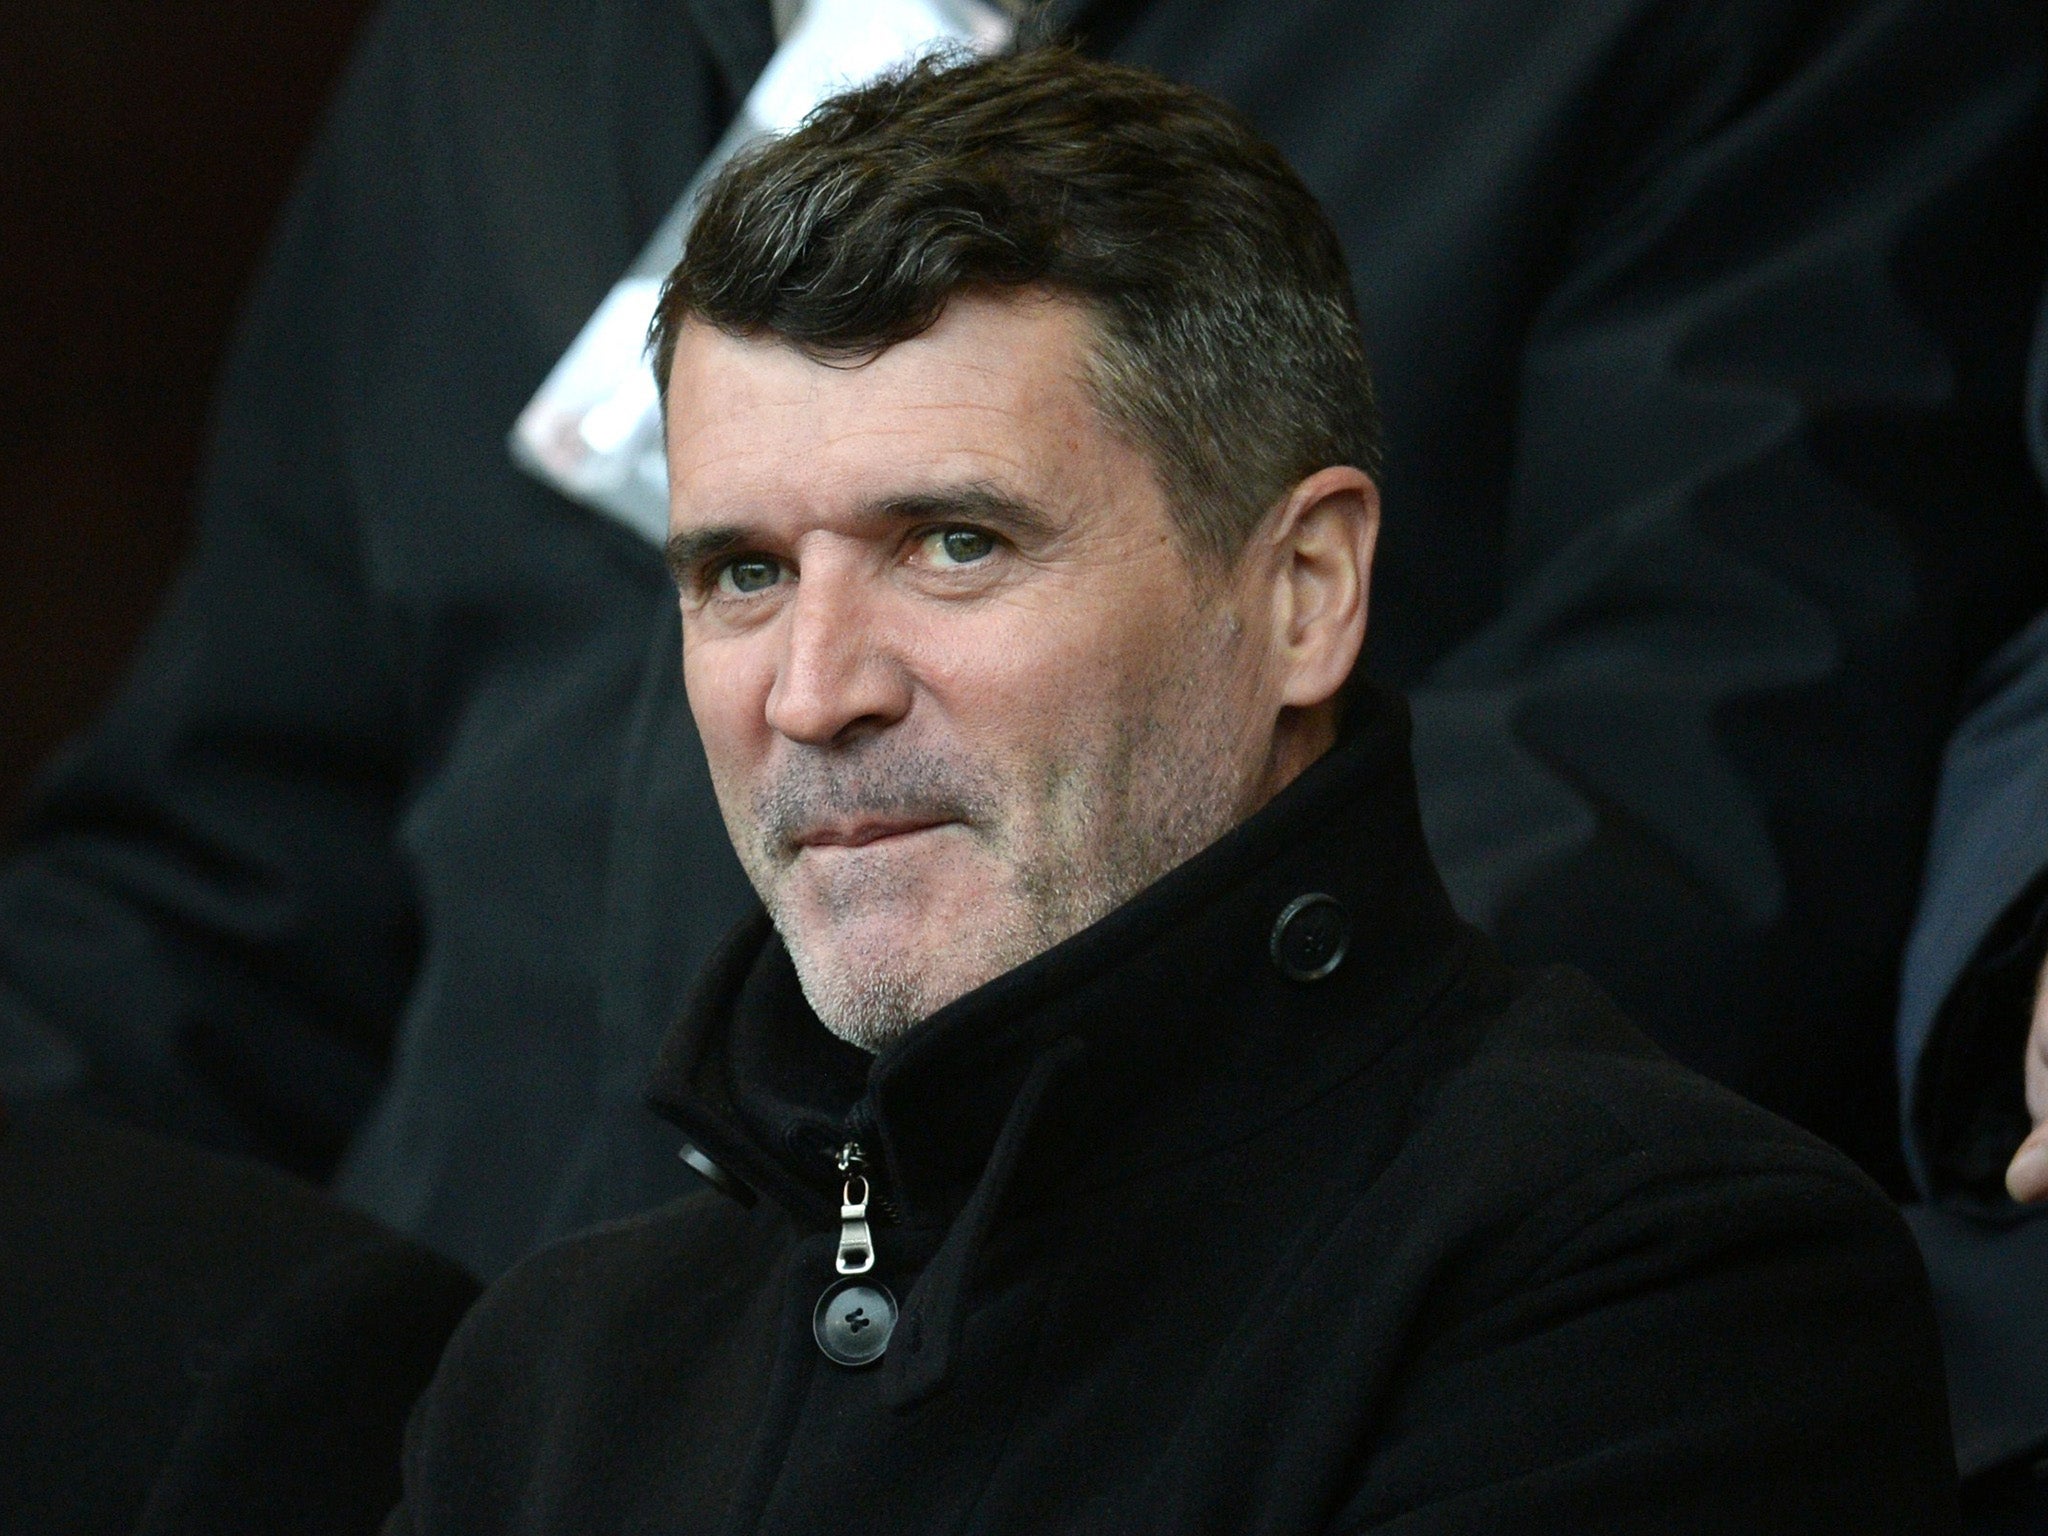 Roy Keane complained during his time at Sunderland that it was difficult to attract players